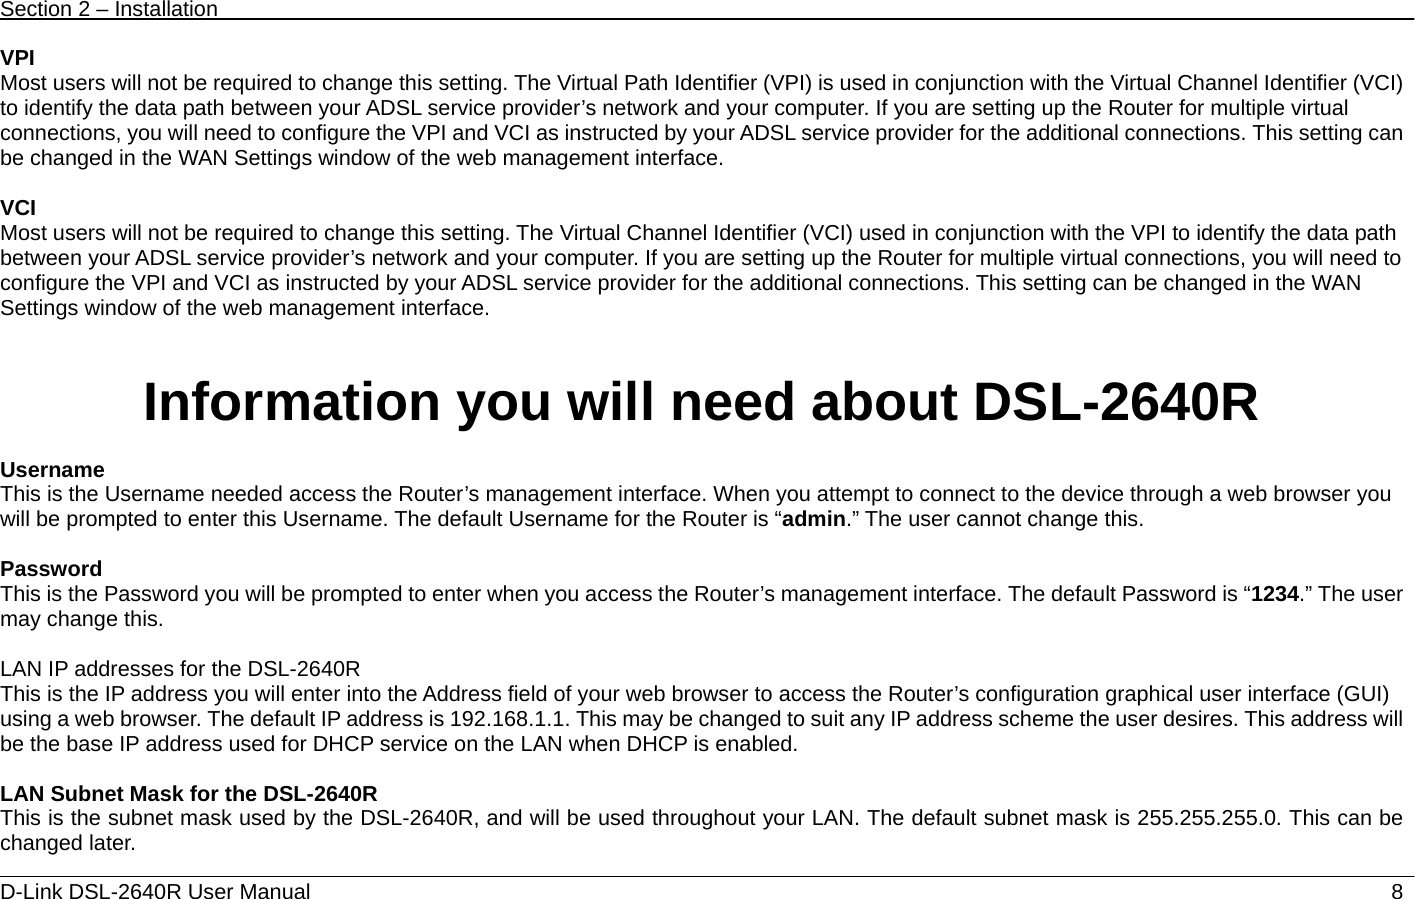 Section 2 – Installation   D-Link DSL-2640R User Manual                            8VPI Most users will not be required to change this setting. The Virtual Path Identifier (VPI) is used in conjunction with the Virtual Channel Identifier (VCI) to identify the data path between your ADSL service provider’s network and your computer. If you are setting up the Router for multiple virtual connections, you will need to configure the VPI and VCI as instructed by your ADSL service provider for the additional connections. This setting can be changed in the WAN Settings window of the web management interface.    VCI Most users will not be required to change this setting. The Virtual Channel Identifier (VCI) used in conjunction with the VPI to identify the data path between your ADSL service provider’s network and your computer. If you are setting up the Router for multiple virtual connections, you will need to configure the VPI and VCI as instructed by your ADSL service provider for the additional connections. This setting can be changed in the WAN Settings window of the web management interface.     Information you will need about DSL-2640R  Username  This is the Username needed access the Router’s management interface. When you attempt to connect to the device through a web browser you will be prompted to enter this Username. The default Username for the Router is “admin.” The user cannot change this.    Password This is the Password you will be prompted to enter when you access the Router’s management interface. The default Password is “1234.” The user may change this.    LAN IP addresses for the DSL-2640R This is the IP address you will enter into the Address field of your web browser to access the Router’s configuration graphical user interface (GUI) using a web browser. The default IP address is 192.168.1.1. This may be changed to suit any IP address scheme the user desires. This address will be the base IP address used for DHCP service on the LAN when DHCP is enabled.    LAN Subnet Mask for the DSL-2640R This is the subnet mask used by the DSL-2640R, and will be used throughout your LAN. The default subnet mask is 255.255.255.0. This can be changed later.   